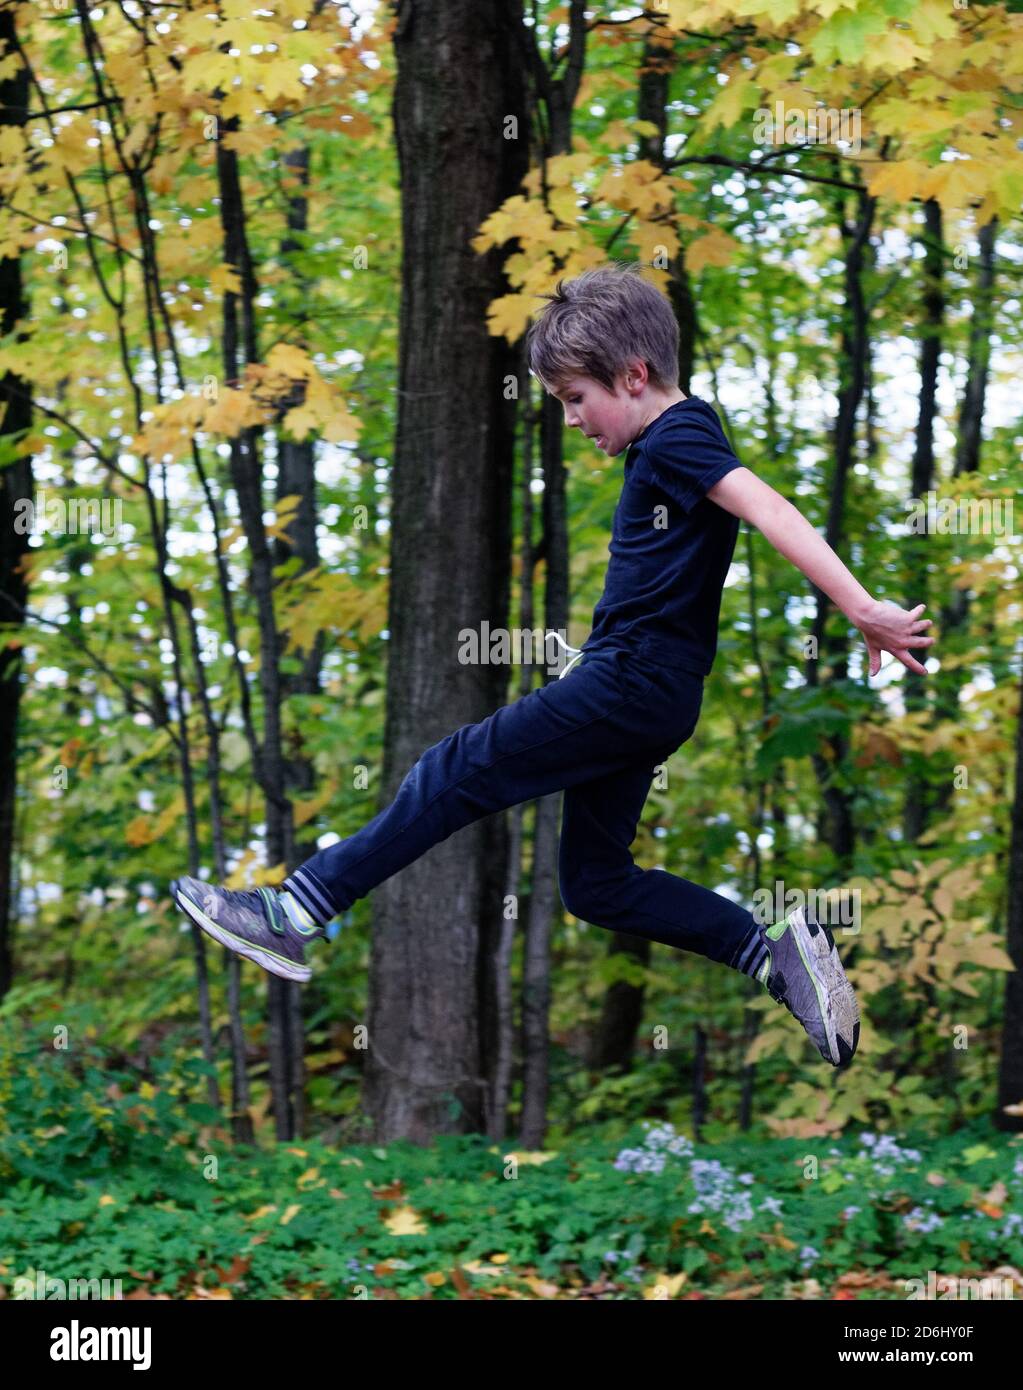 An athletic 8 year old boy jumping high in the air Stock Photo